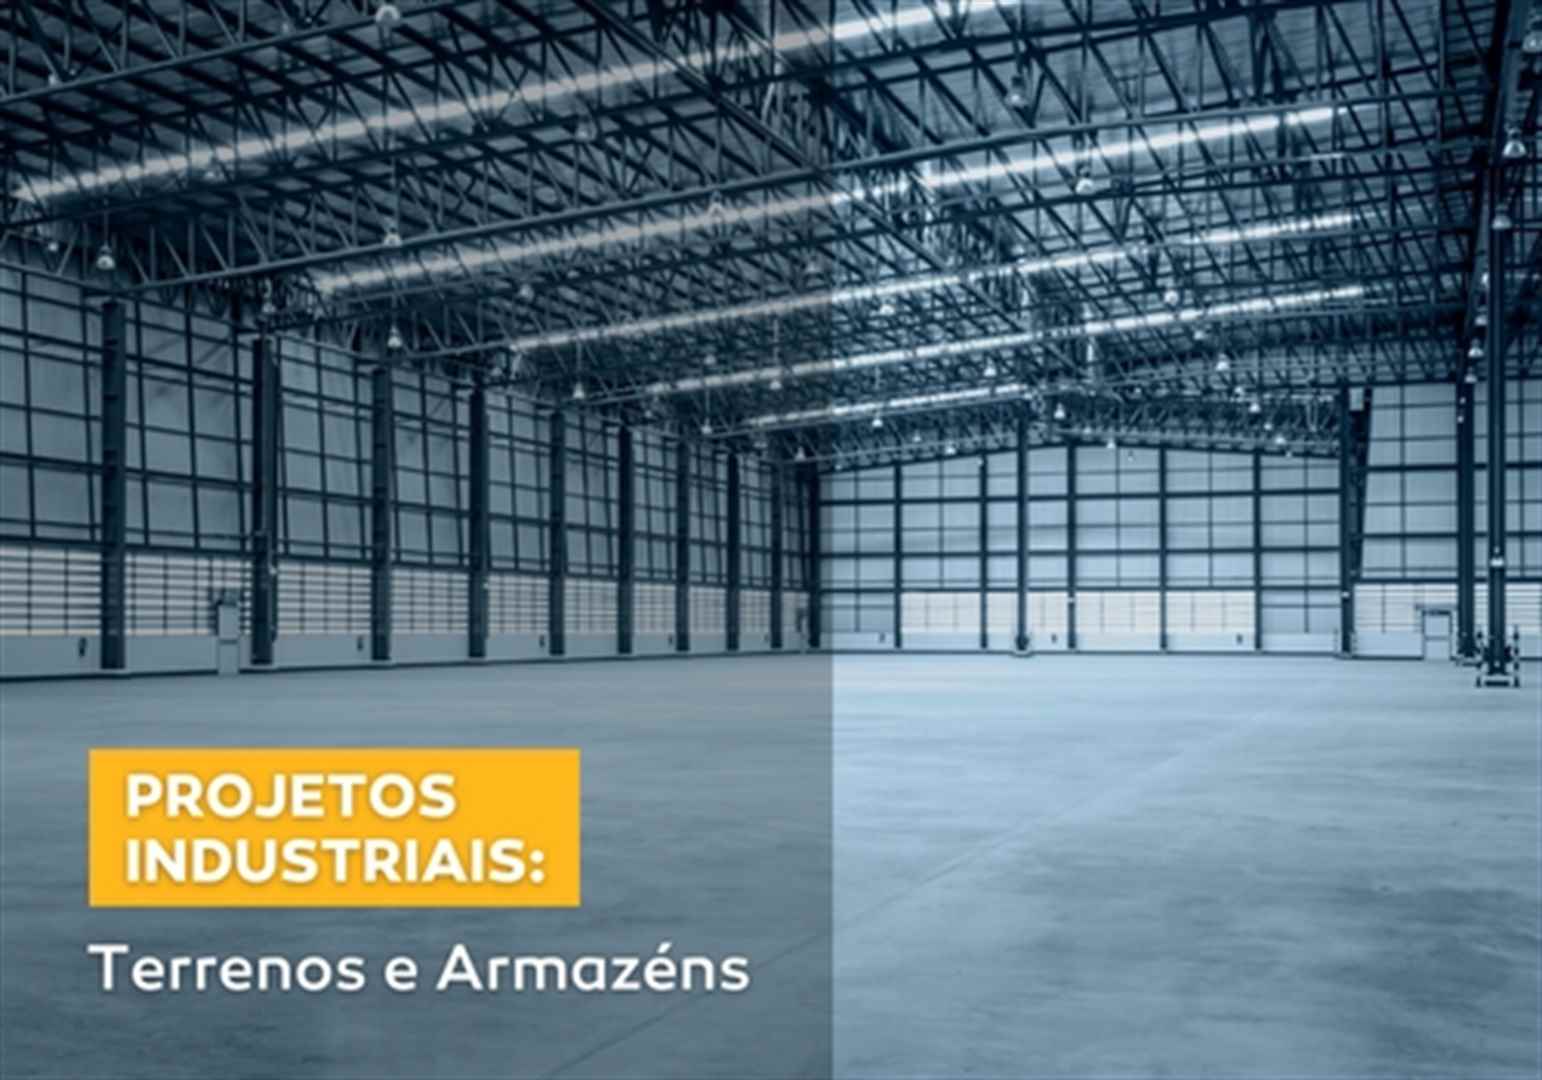 Industrial Projects: Plots of Land and Warehouses